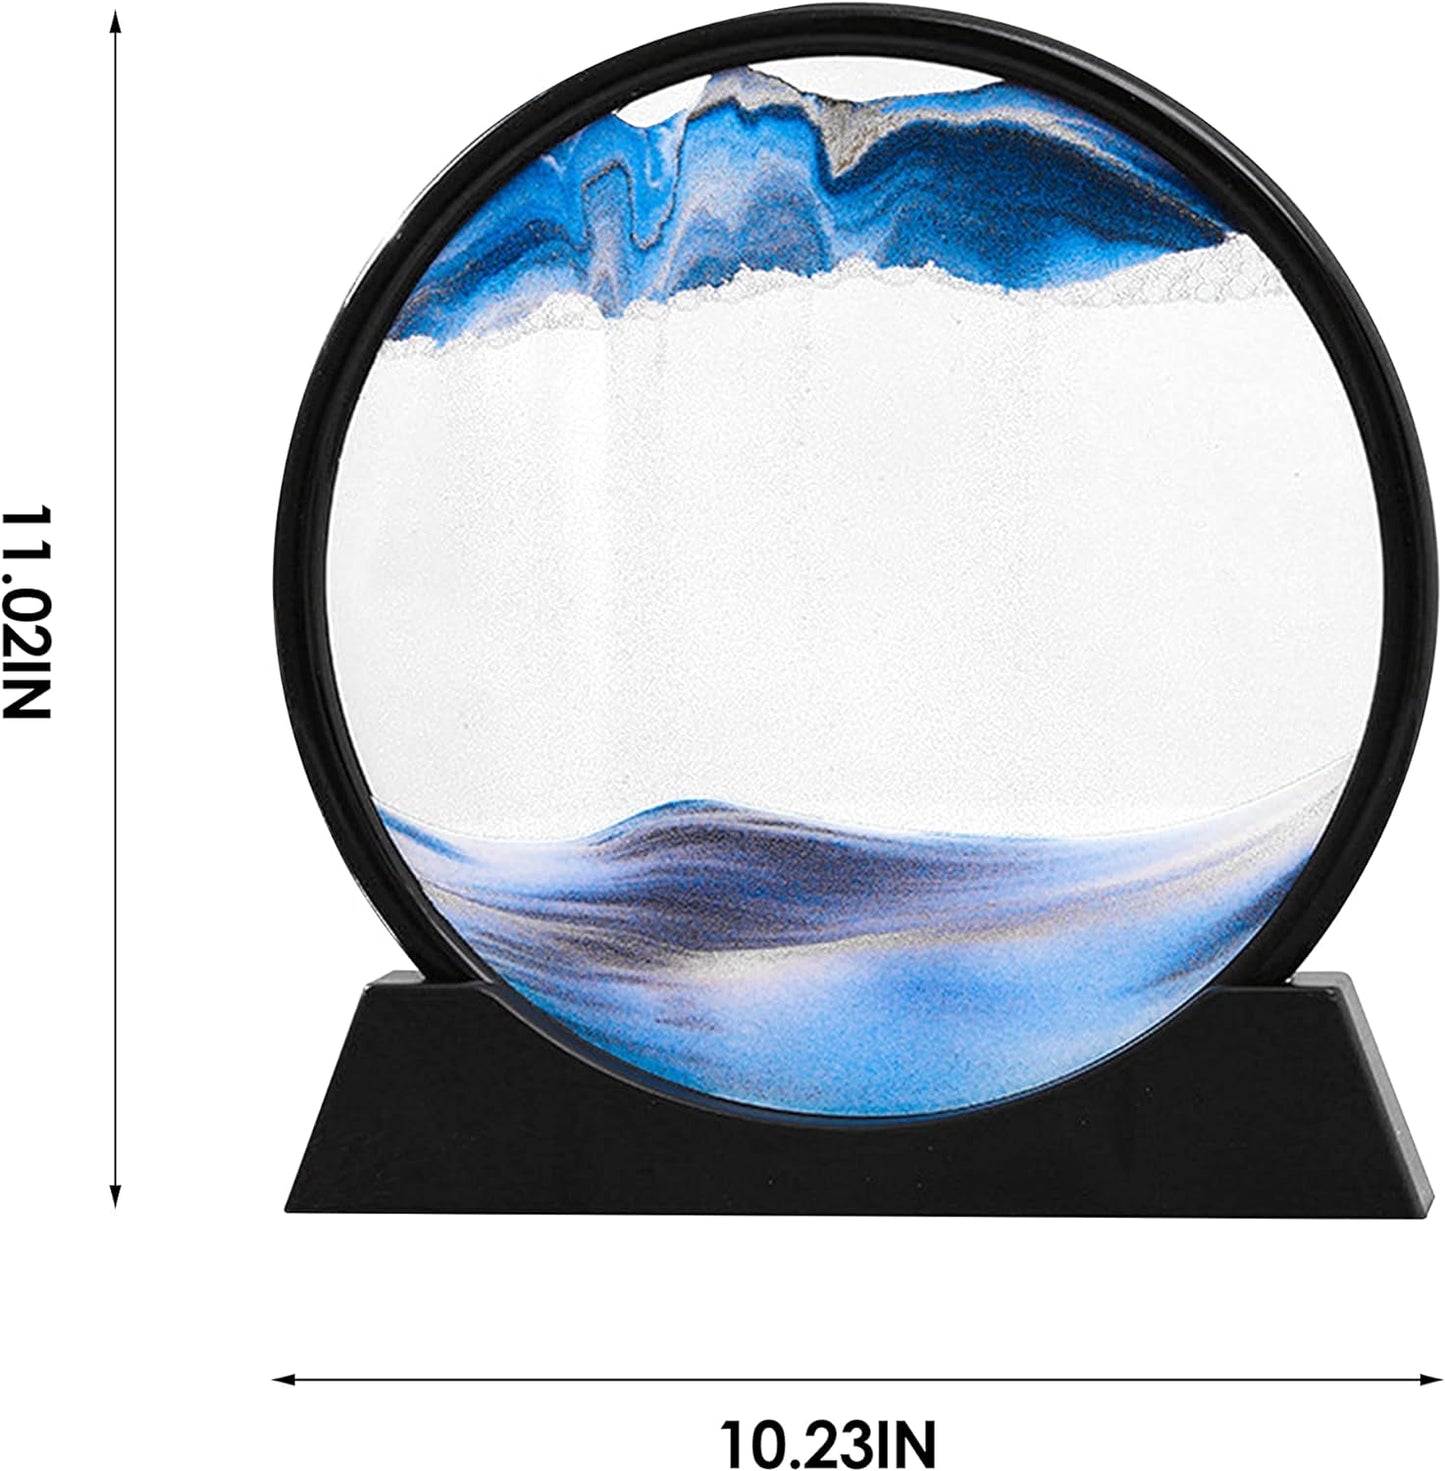 Moving Sand Art Picture Sandscapes in Motion round Glass 3D Deep Sea Sandscape in Motion Display Flowing Sand Frame Relaxing Home Office Decoration (12In, Blue)